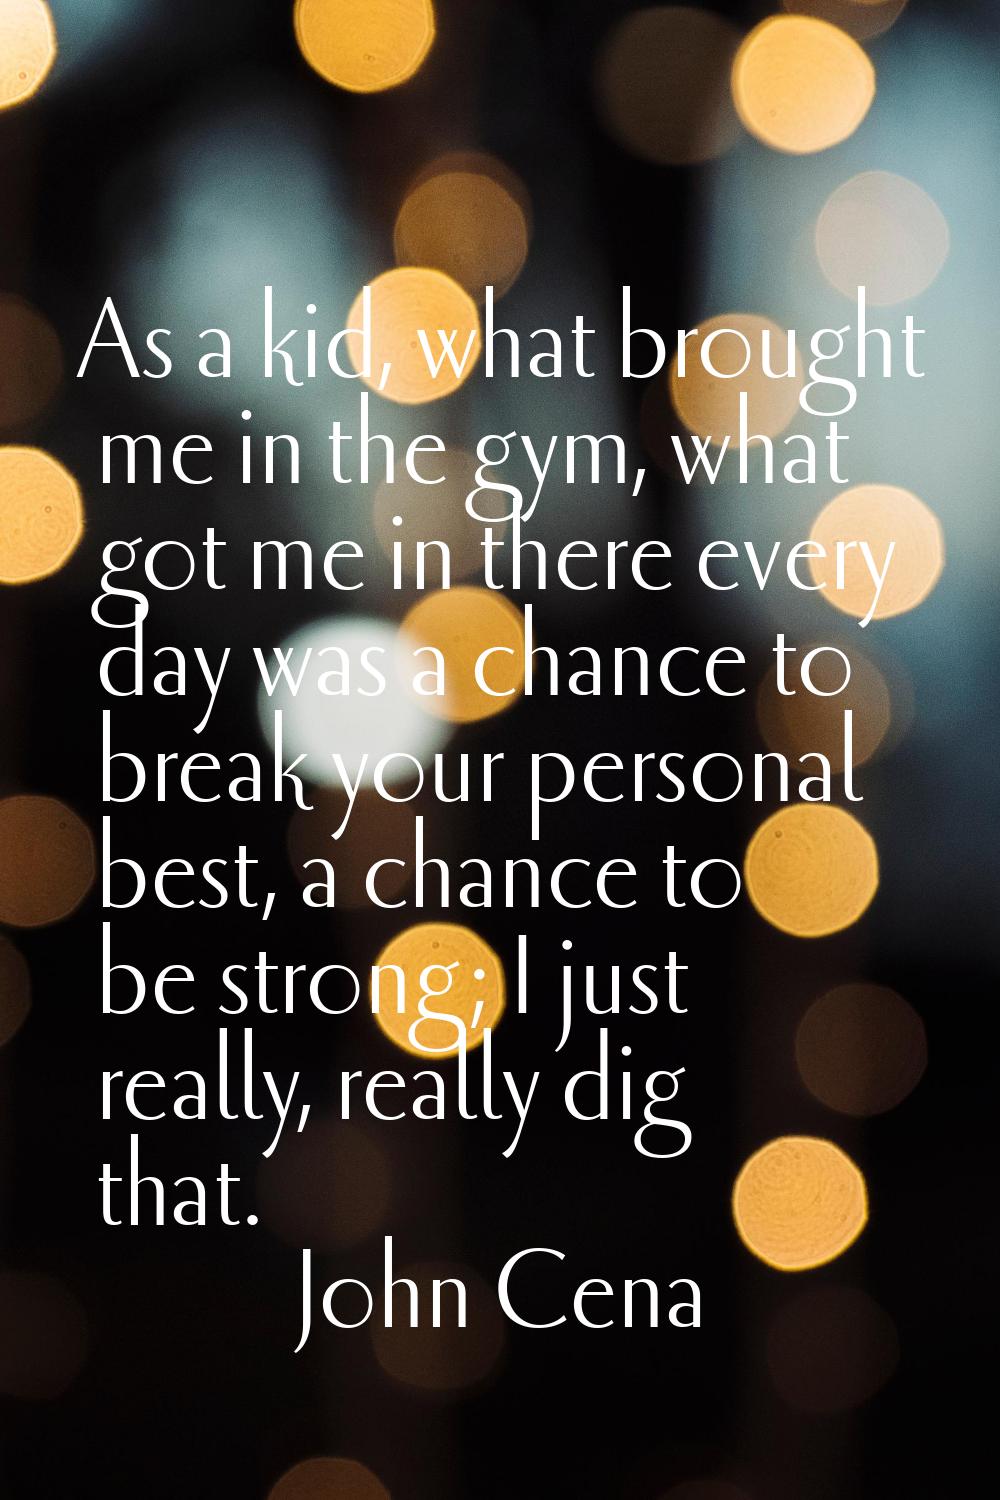 As a kid, what brought me in the gym, what got me in there every day was a chance to break your per